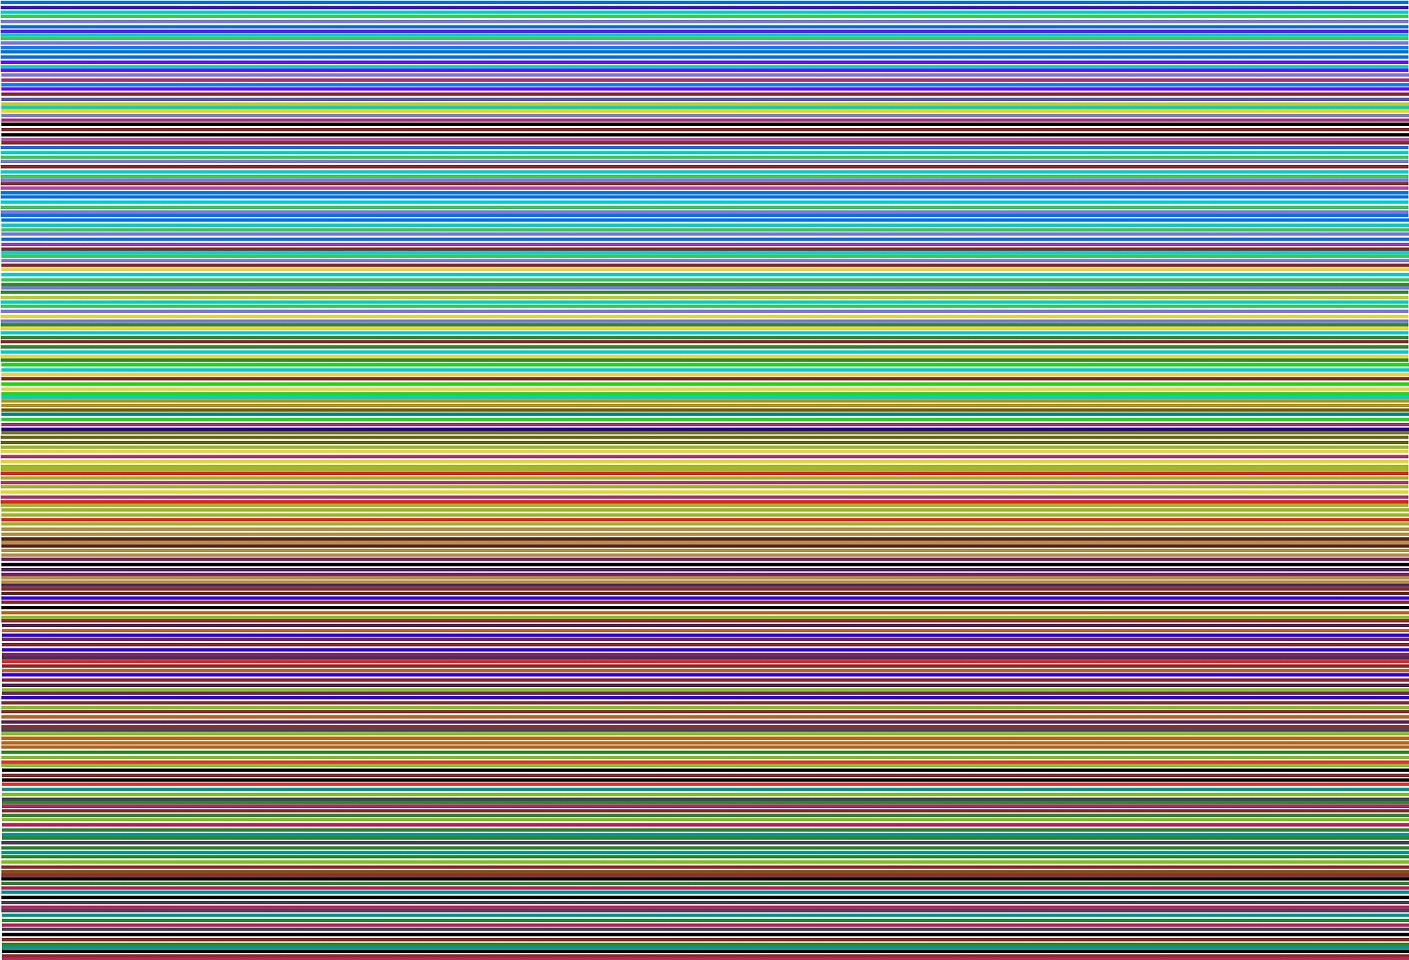 Dane Albert, Color Sticks #15, 2023
Acrylic on canvas (Concept), 48 x 72 in. (121.9 x 182.9 cm)
Series of colored lines and shapes in multiple configurations
DA.2023.sticks-015